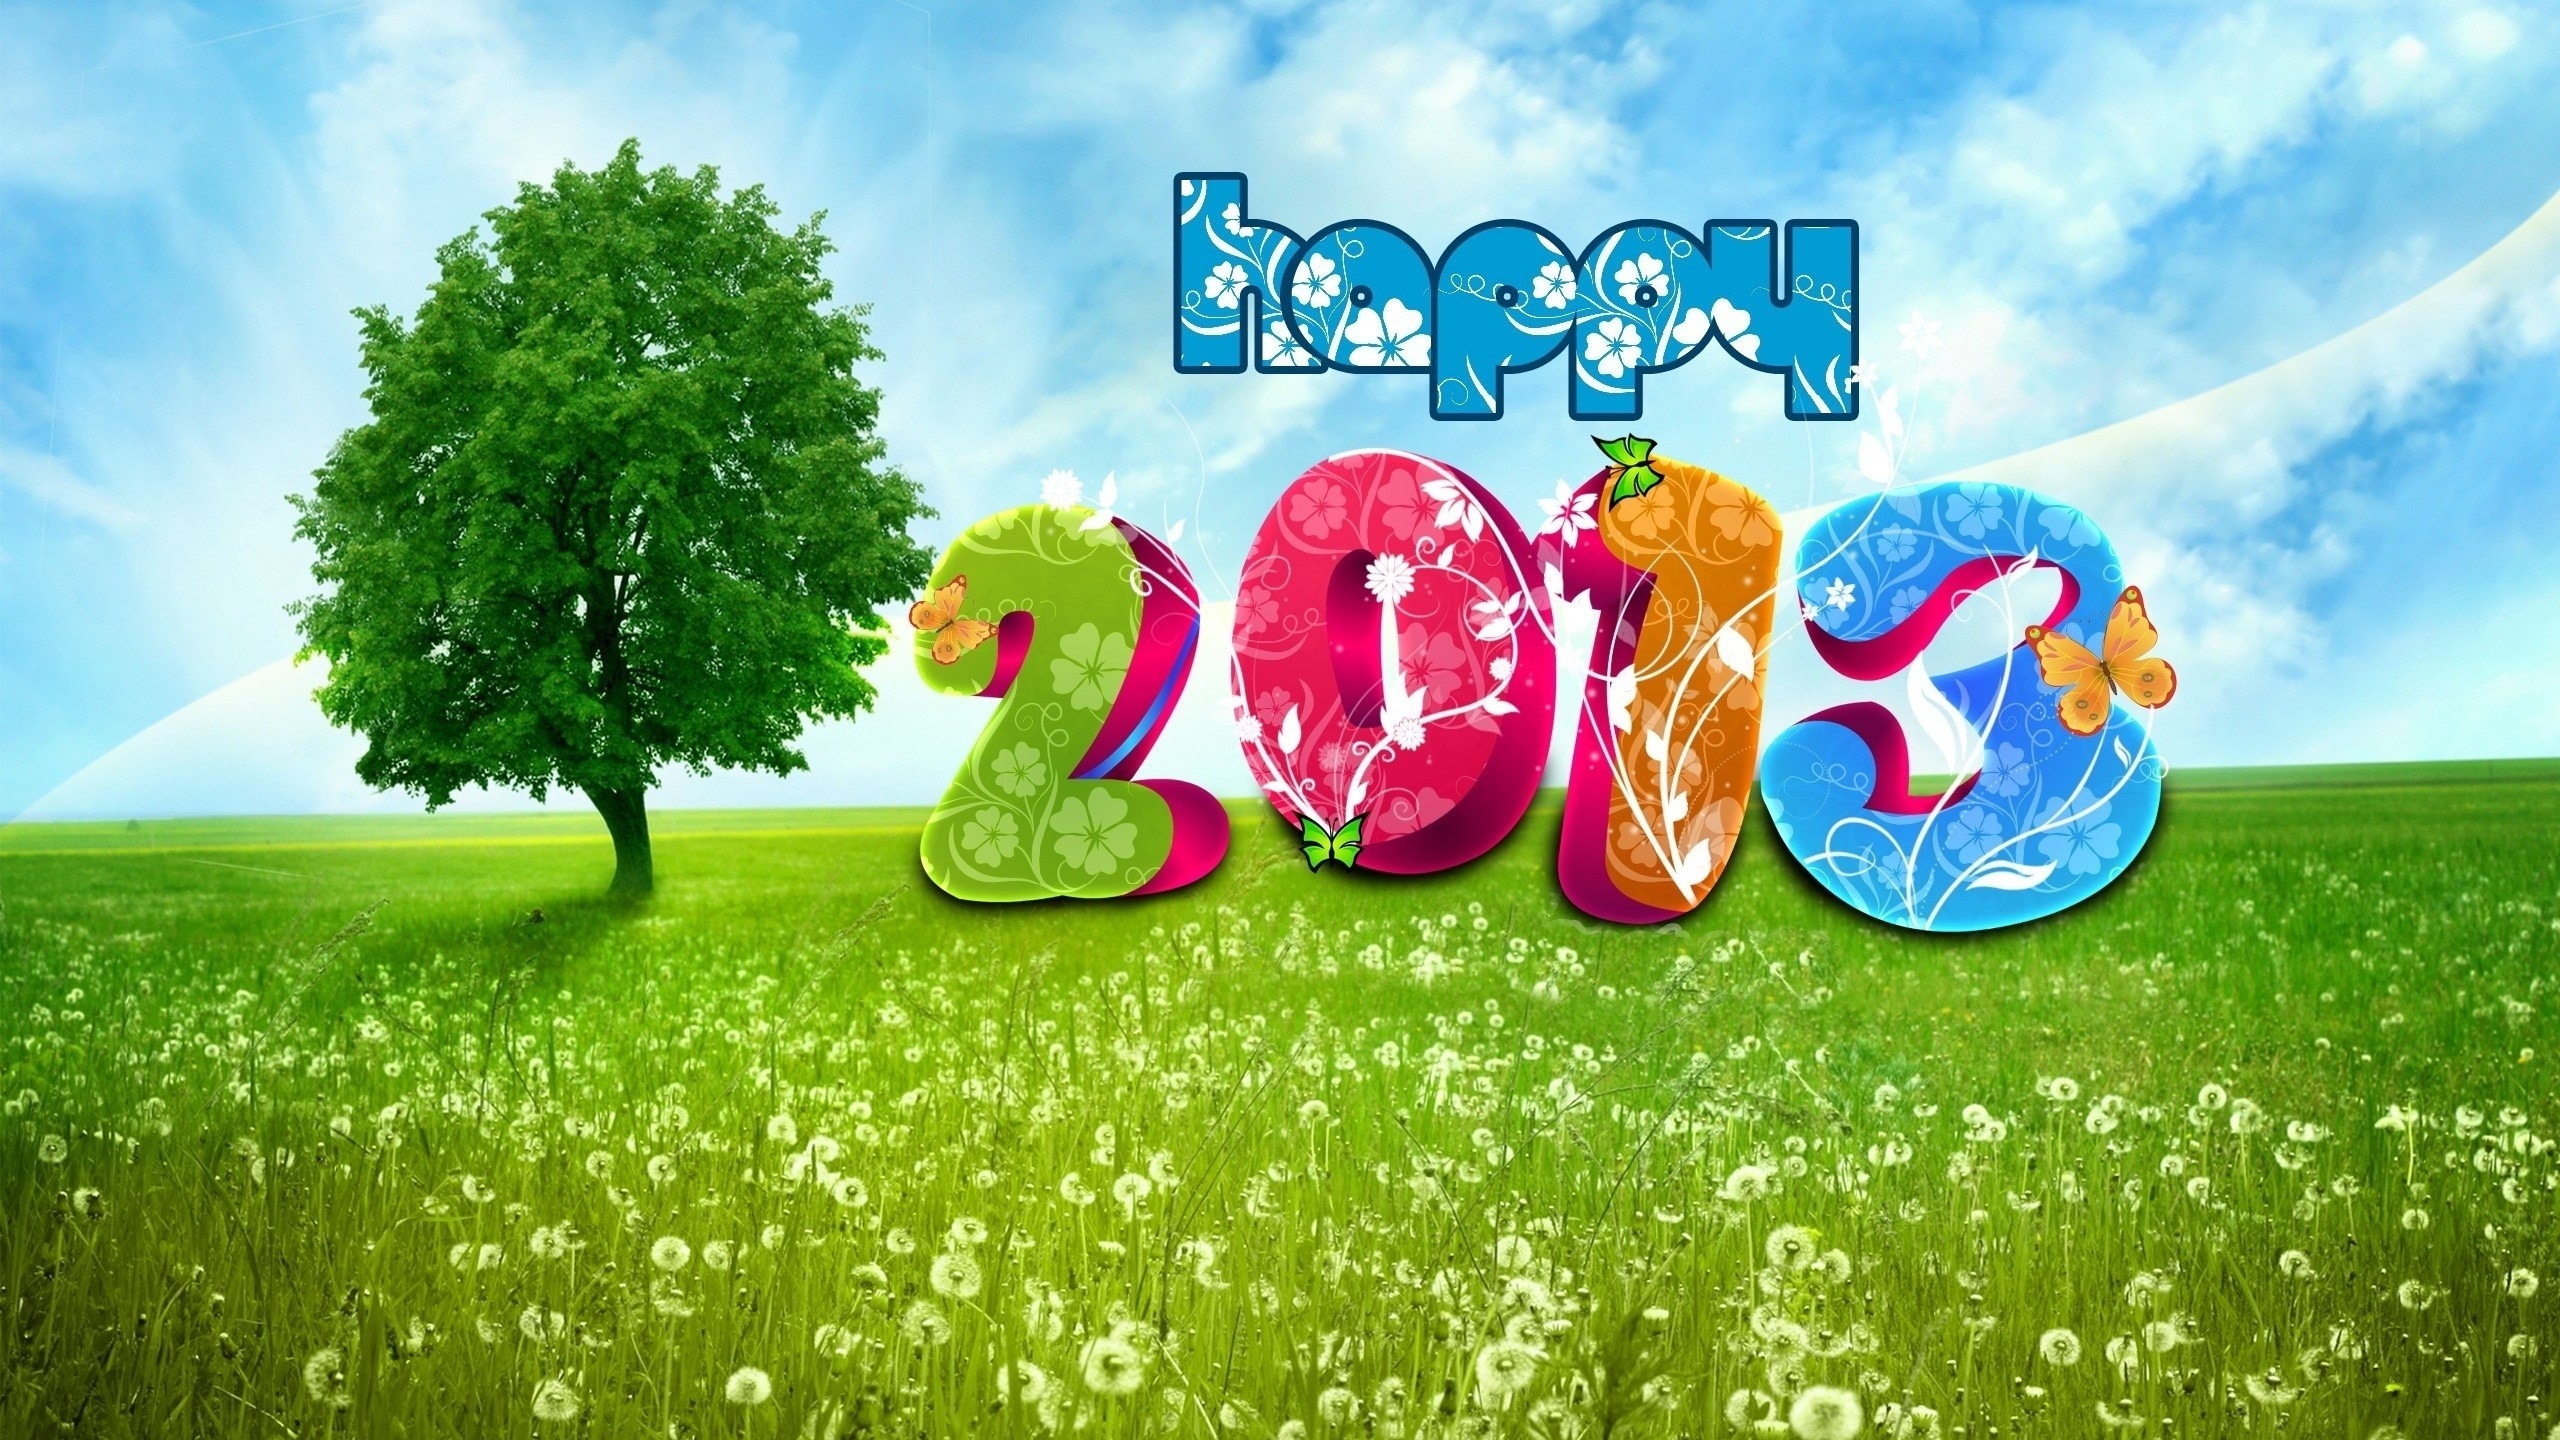 Happy 2013 Spring for 2560x1440 HDTV resolution